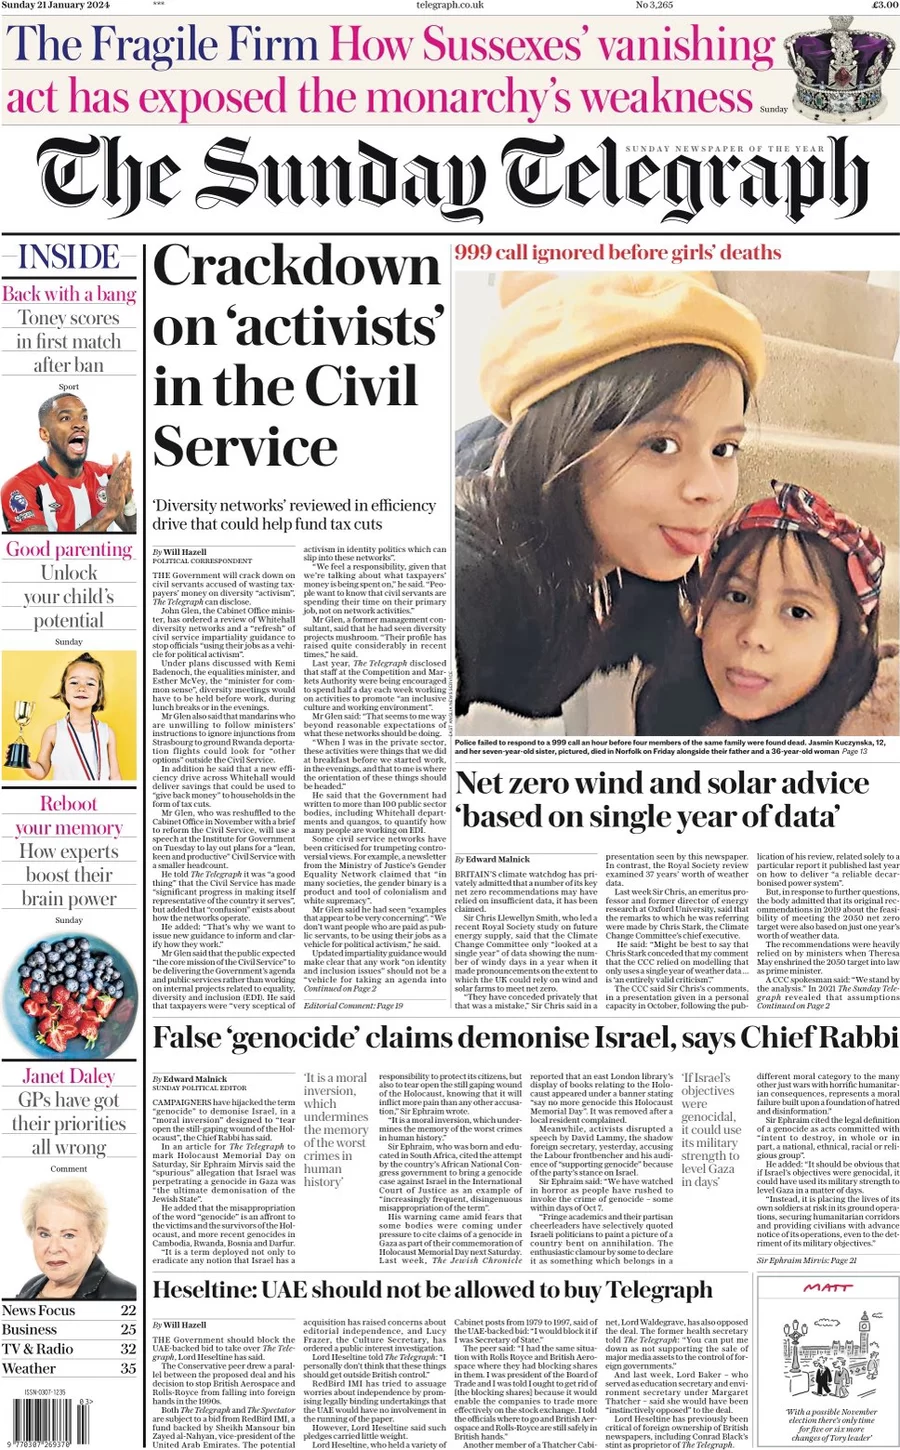 The Sunday Telegraph -Crackdown on ‘activists’ in the Civil Service